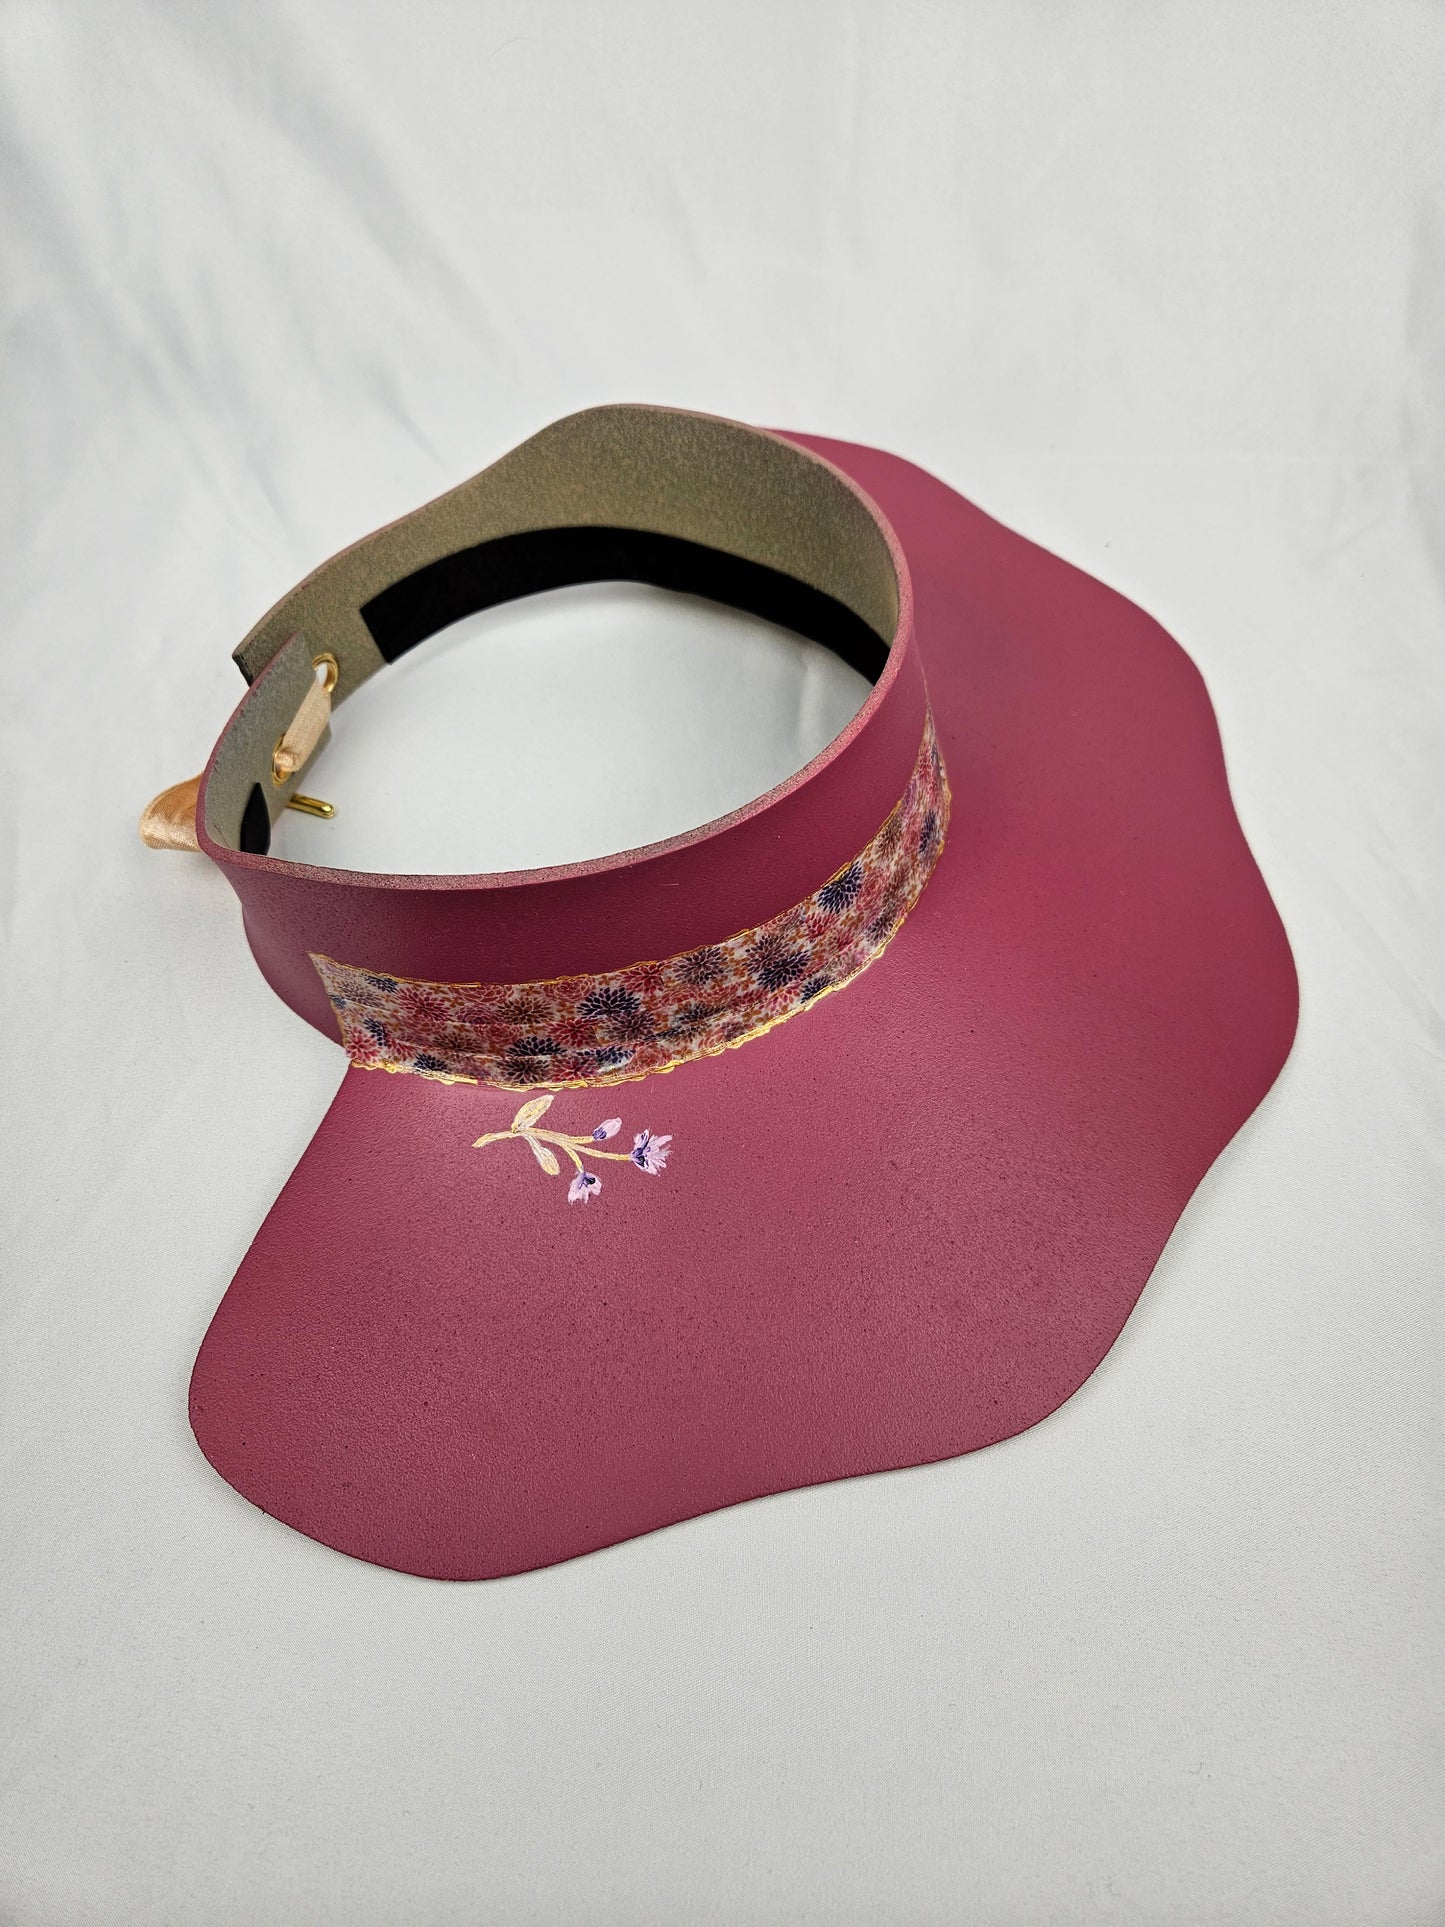 Spring/Summer Pink Lotus Foam Sun Visor Hat with Floral Band and Handpainted Floral Motif: Church, 1950s, Derby, Easter, Swim, Pool, UV Resistant, No Headache